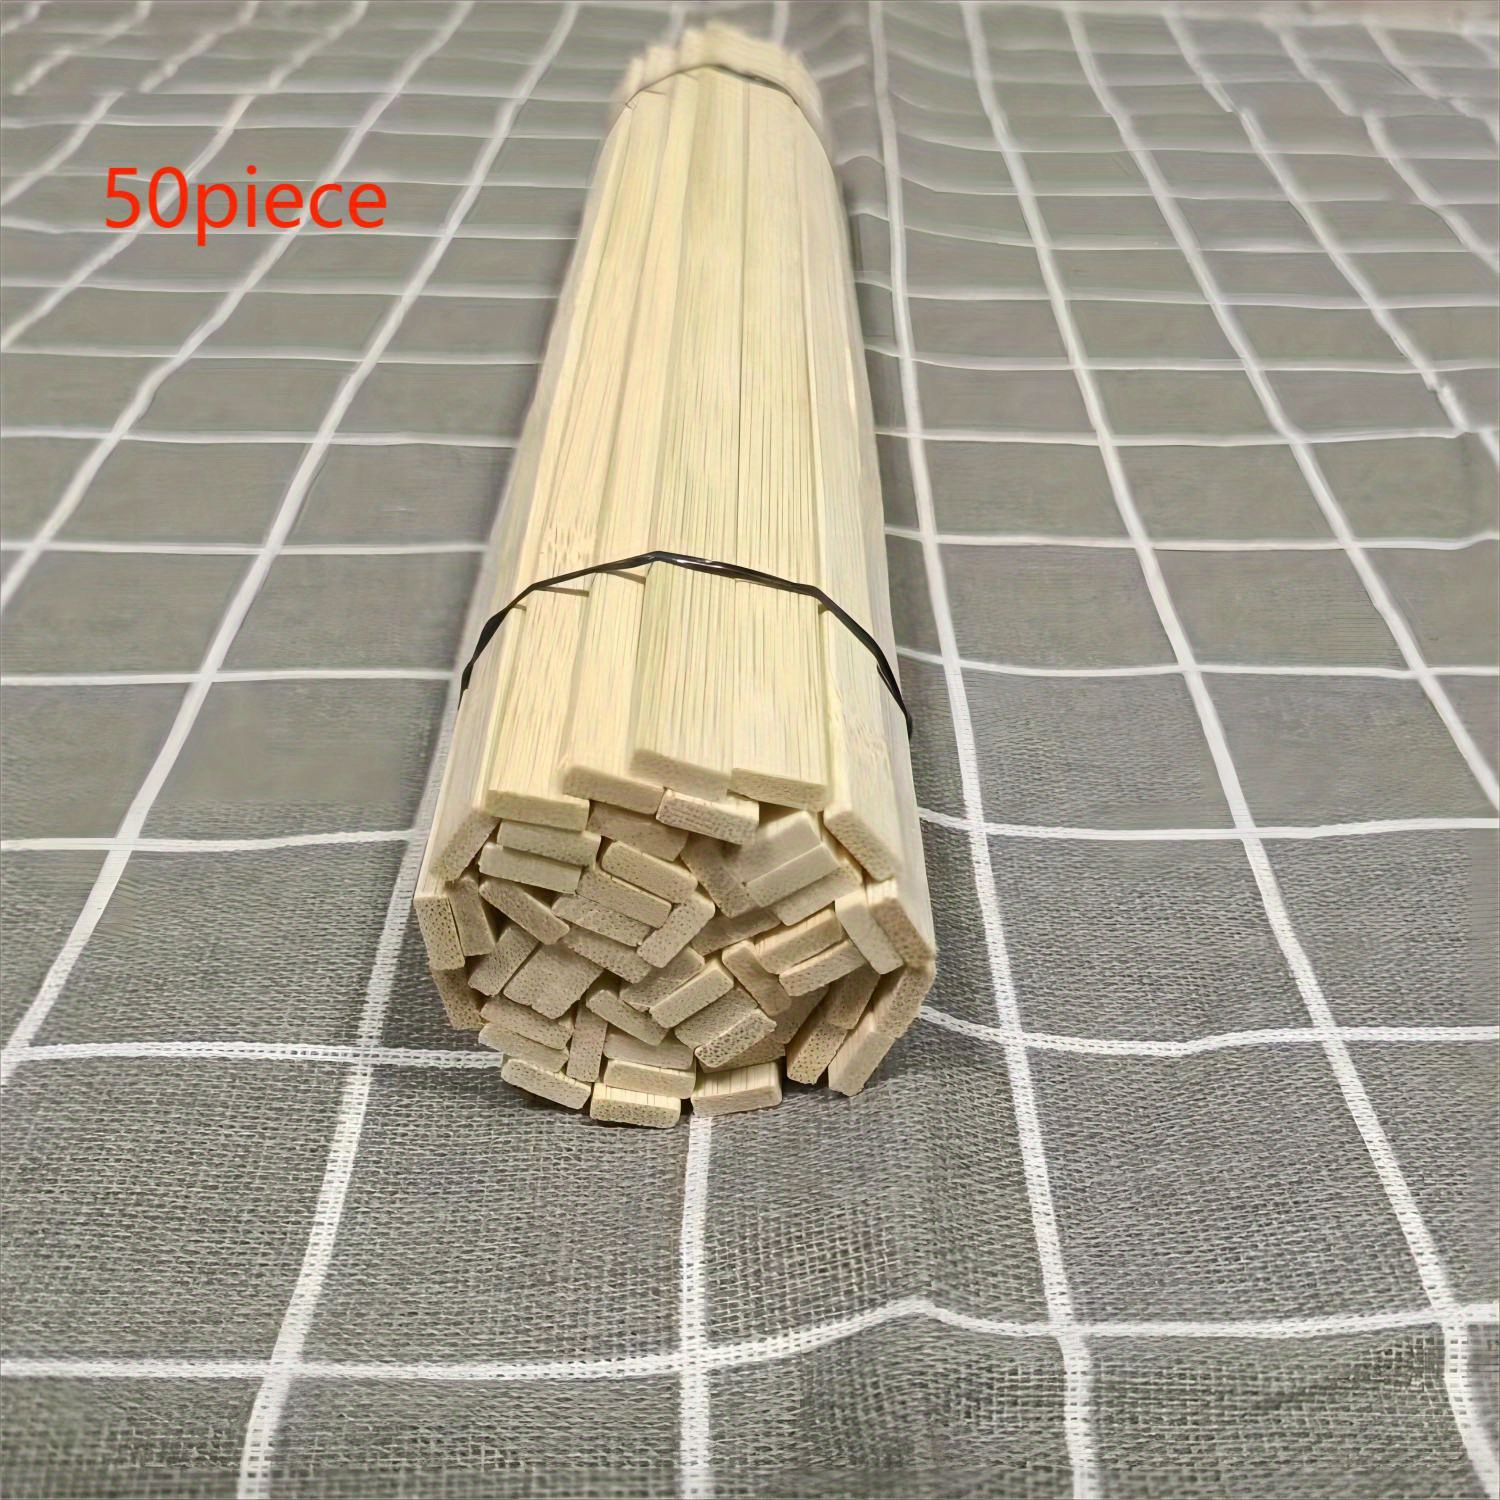 50 pcs 30cm Bamboo Sticks Rods Making Wooden Toys Crafting Wood Pieces  Crafts